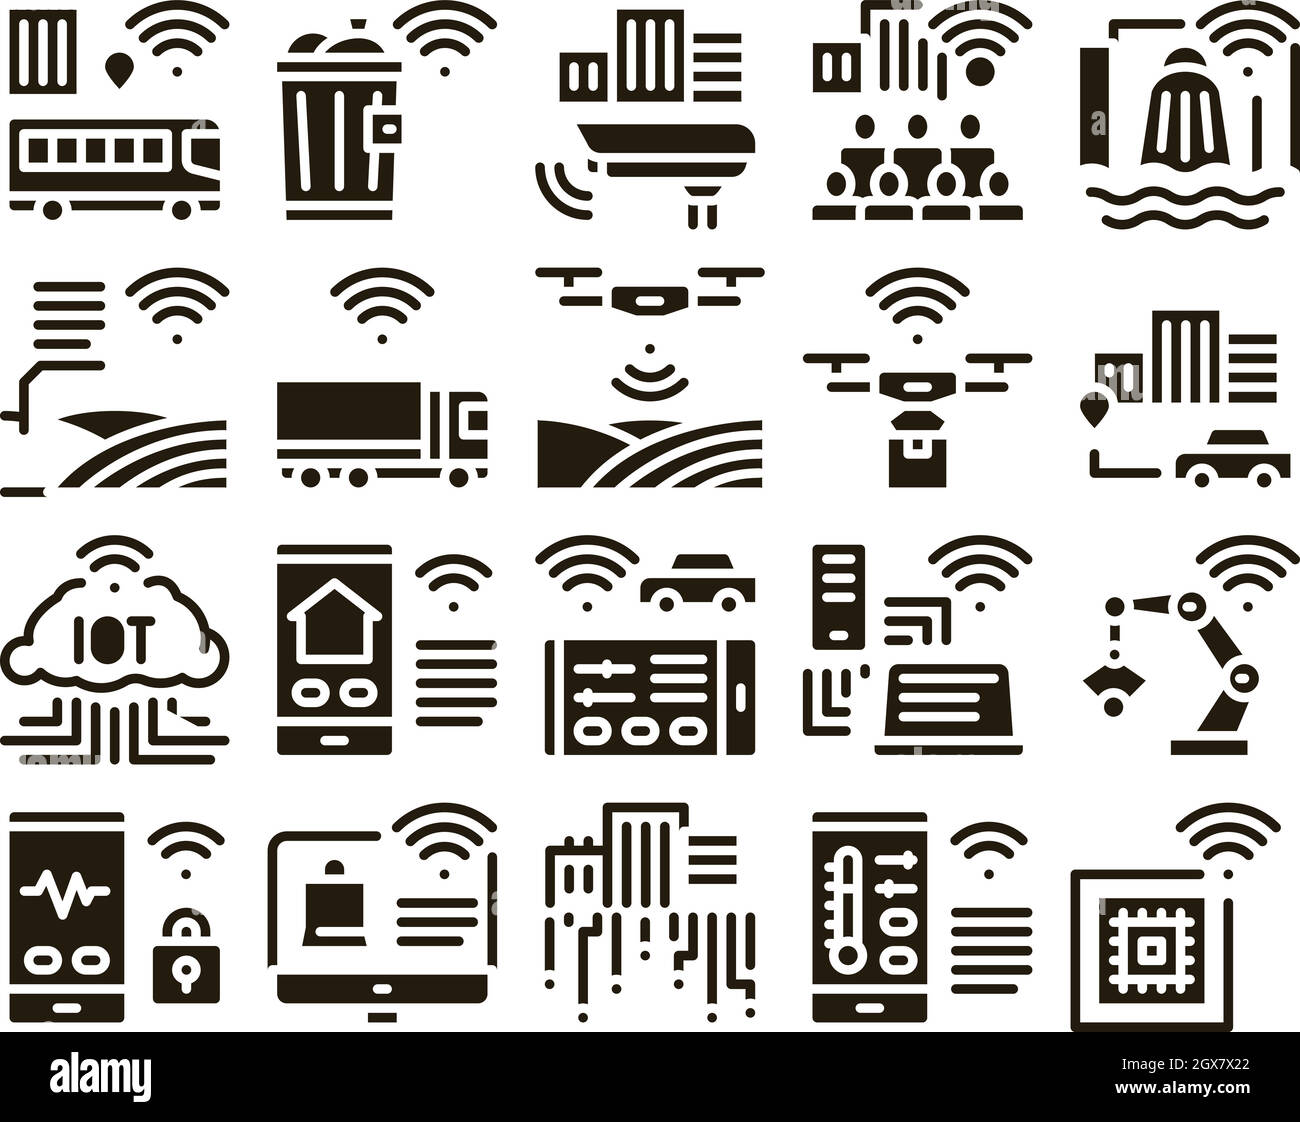 Internet Of Things Glyph Set Vector Stock Vector